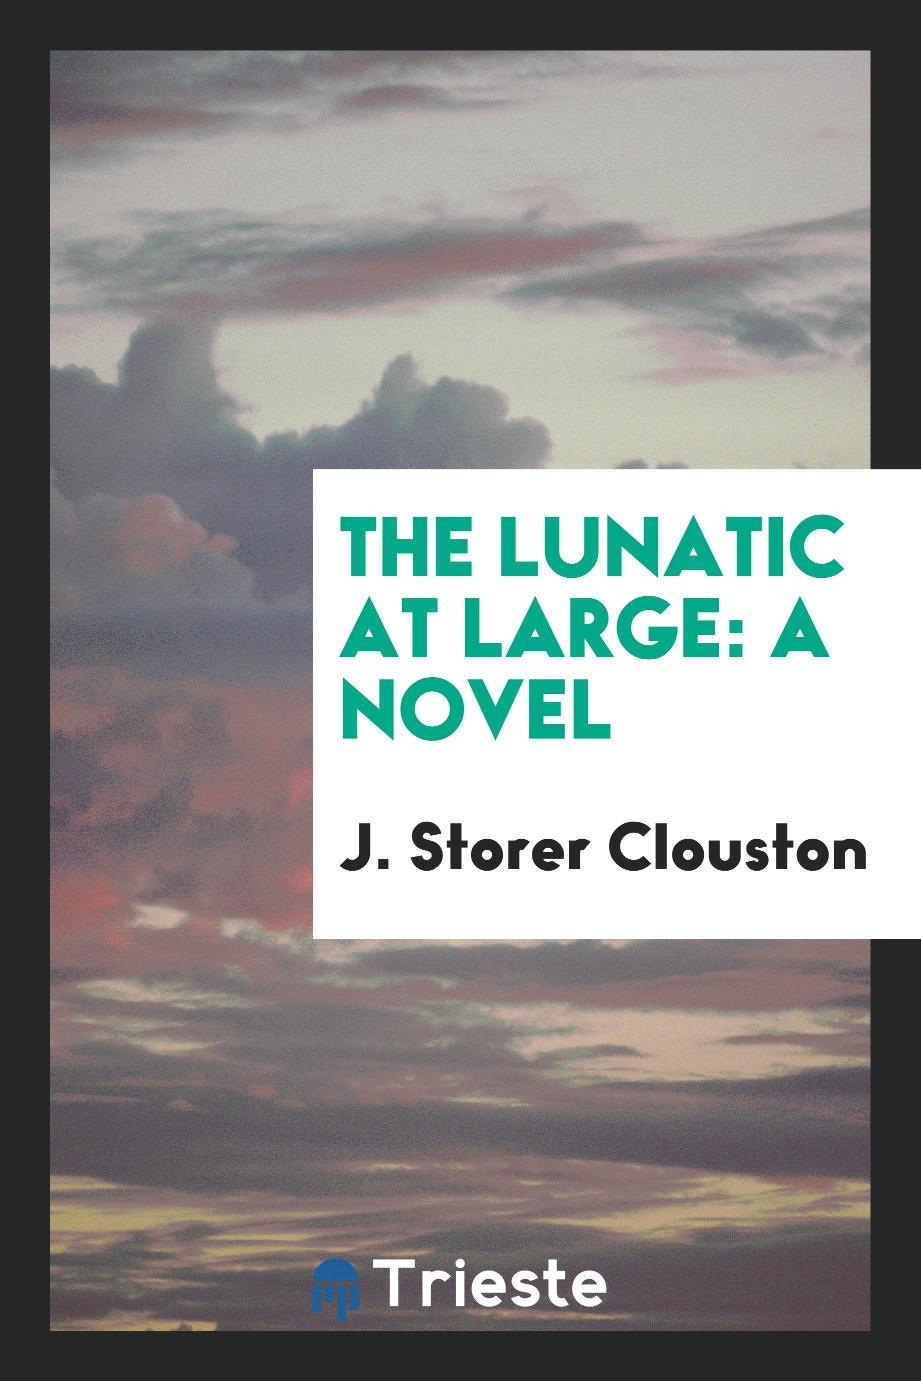 The Lunatic at Large: A Novel